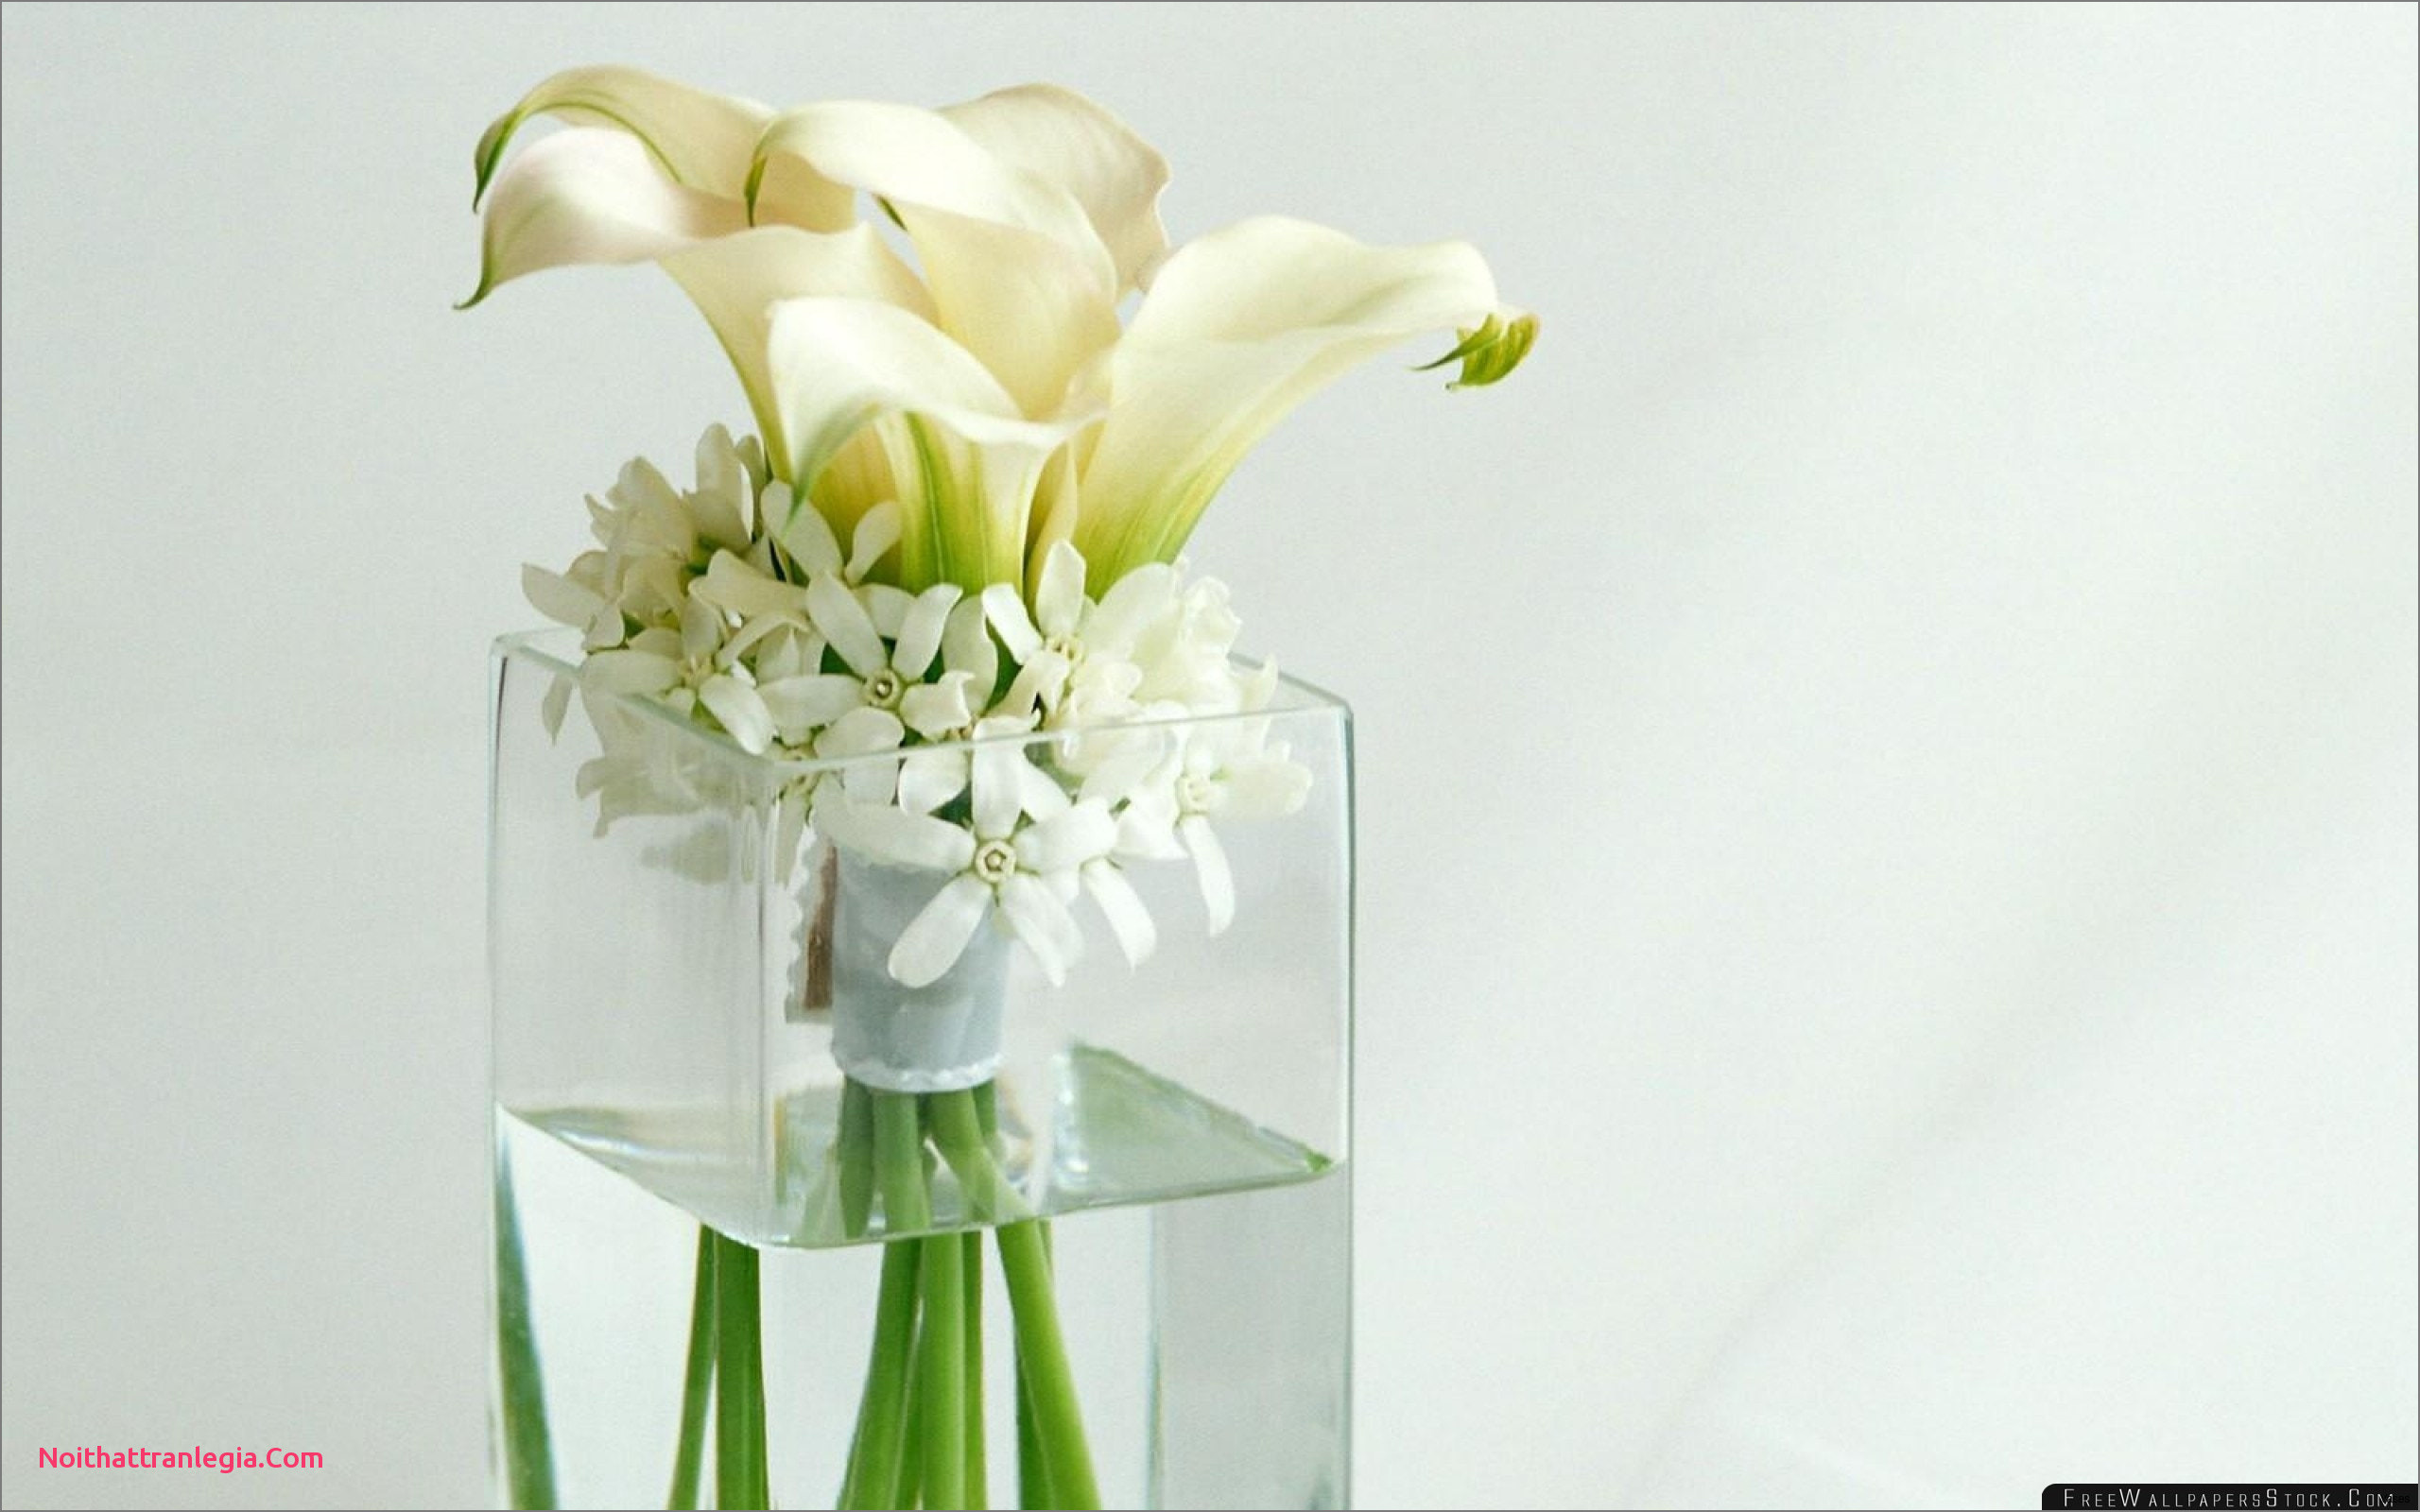 13 attractive White Floor Vase with Flowers 2023 free download white floor vase with flowers of 20 how to clean flower vases noithattranlegia vases design inside tall green vase collection tall vase centerpiece ideas vases flowers in water 0d artificial